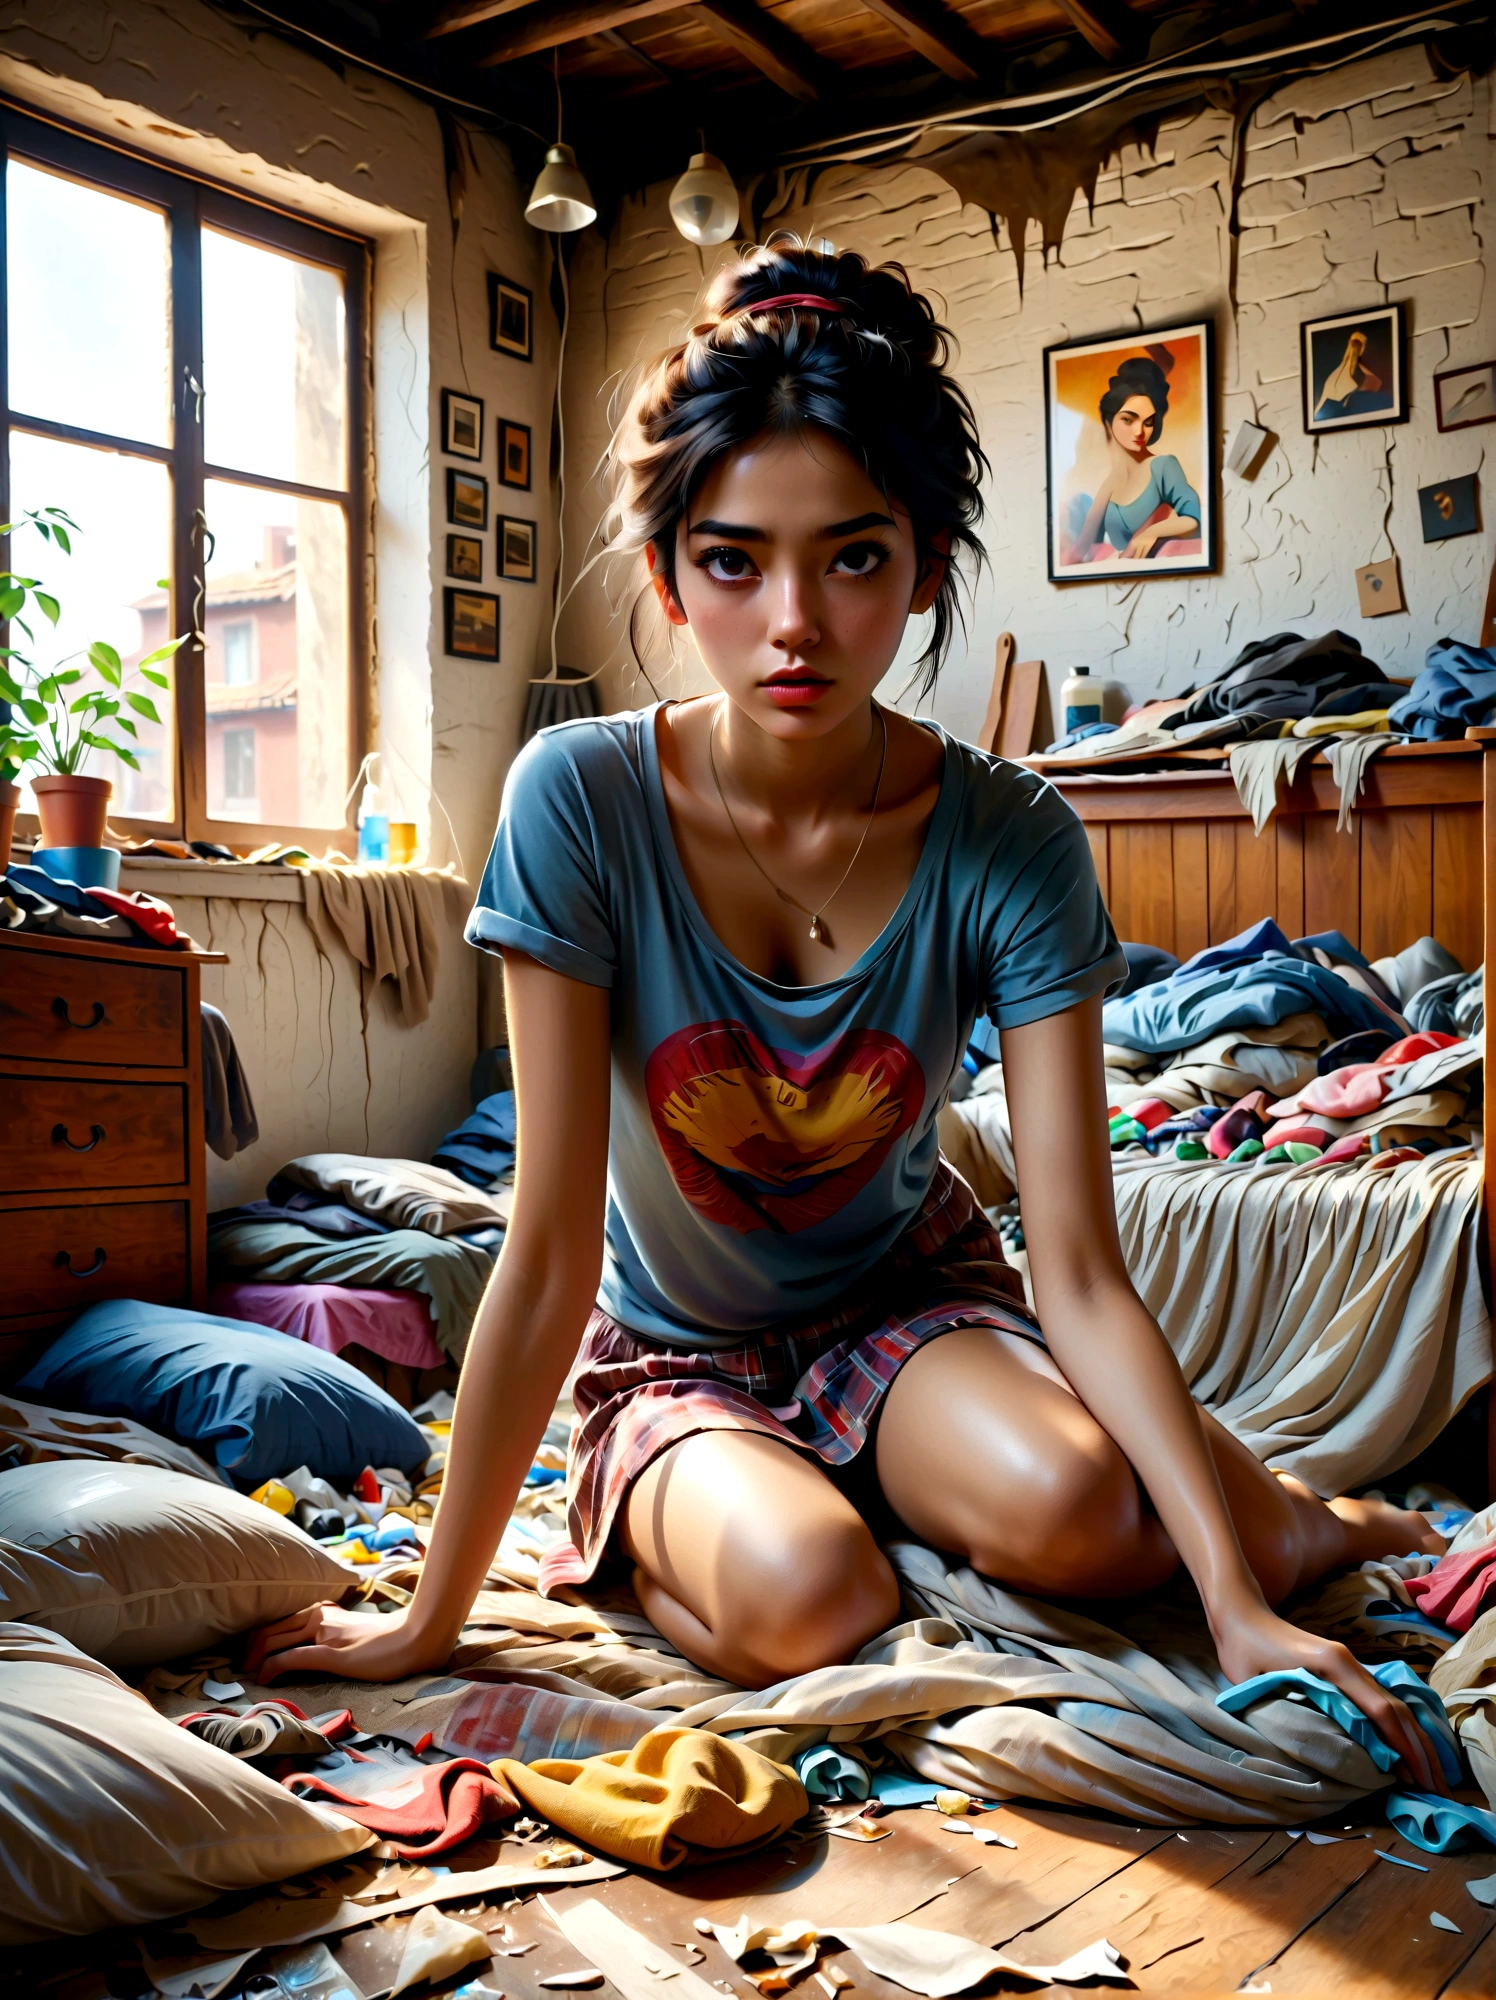 Super Fine, Sharp focus, Physically Based Rendering, Extremely detailed description, major, Vivid colors, A young girl with a disgusted expression, Cleaning a Messy Room, dust, net, A bunch of clothes, Unmade bed, Dirty dishes, garbage on the floor, Realistic details, Beautiful detailed eyes, Beautiful detailed lips, Extremely detailed eyes and face, Long eyelashes, Messy hair, Sweating, exhausted, Frustration, Realistic shadows, Realistic lighting, Natural light